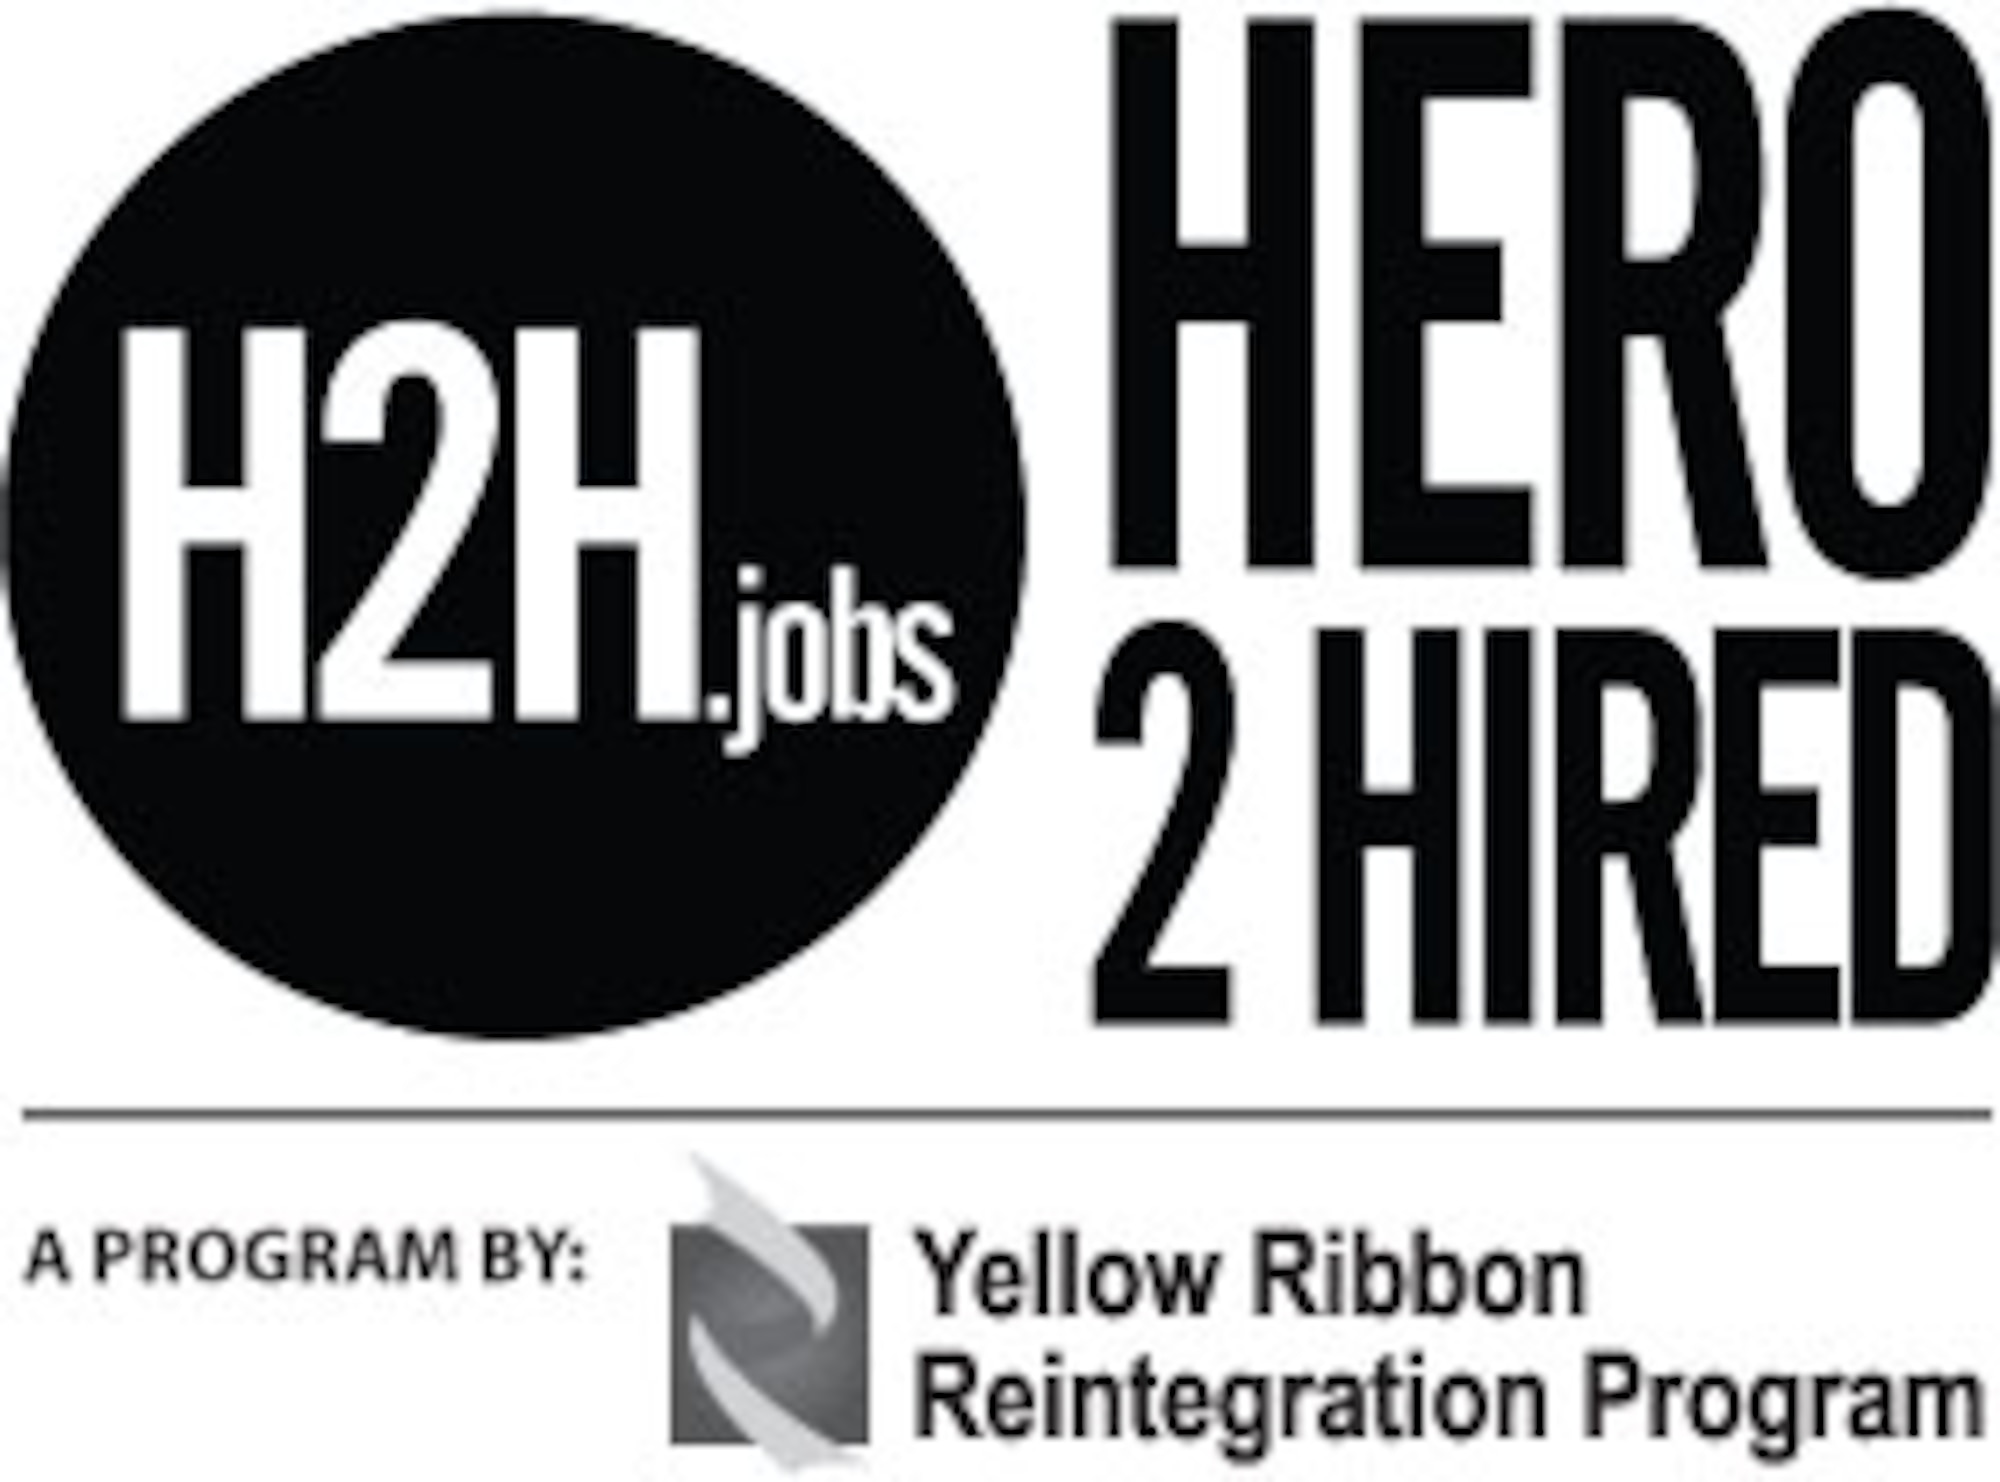 In response to these issues of unemployment and underemployment among reserve component members, the Office of the Assistant Secretary of Defense for Reserve Affairs launched “Hero2Hired,” better known as H2H. The program is a Yellow Ribbon-funded, multi-faceted program which utilizes an electronic job and career web platform, mobile applications and Facebook integration and virtual and physical career fairs. (courtesy graphic)